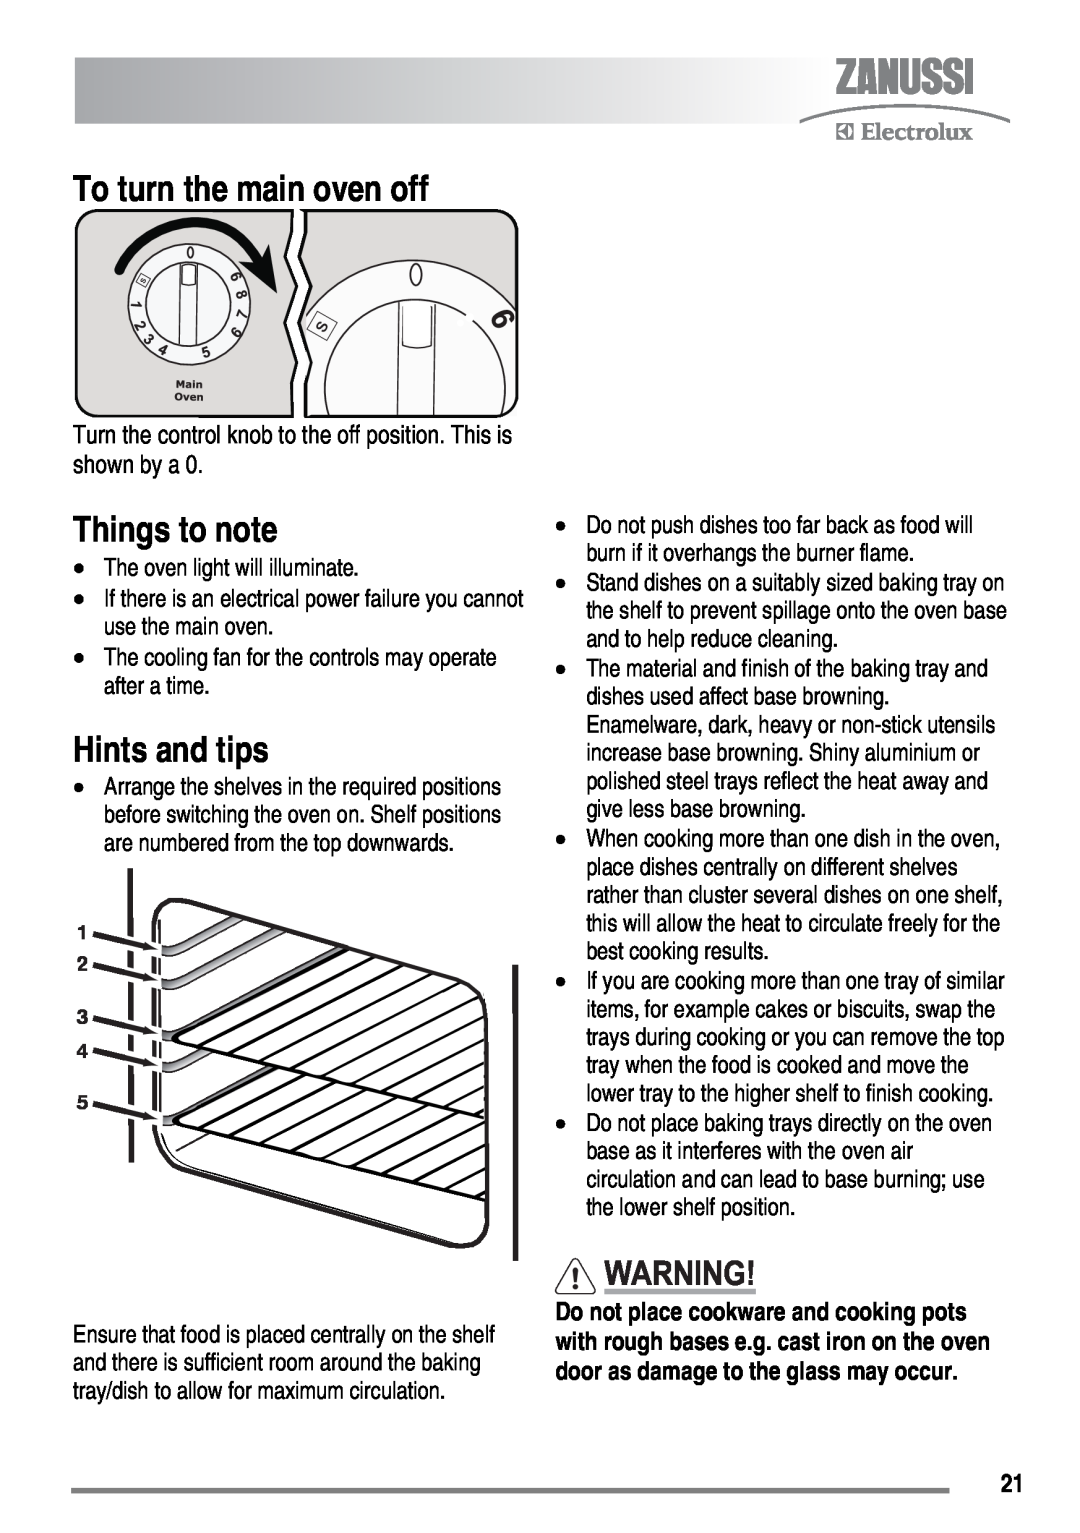 Zanussi ZKG6040 user manual To turn the main oven off, The oven light will illuminate, Things to note, Hints and tips 